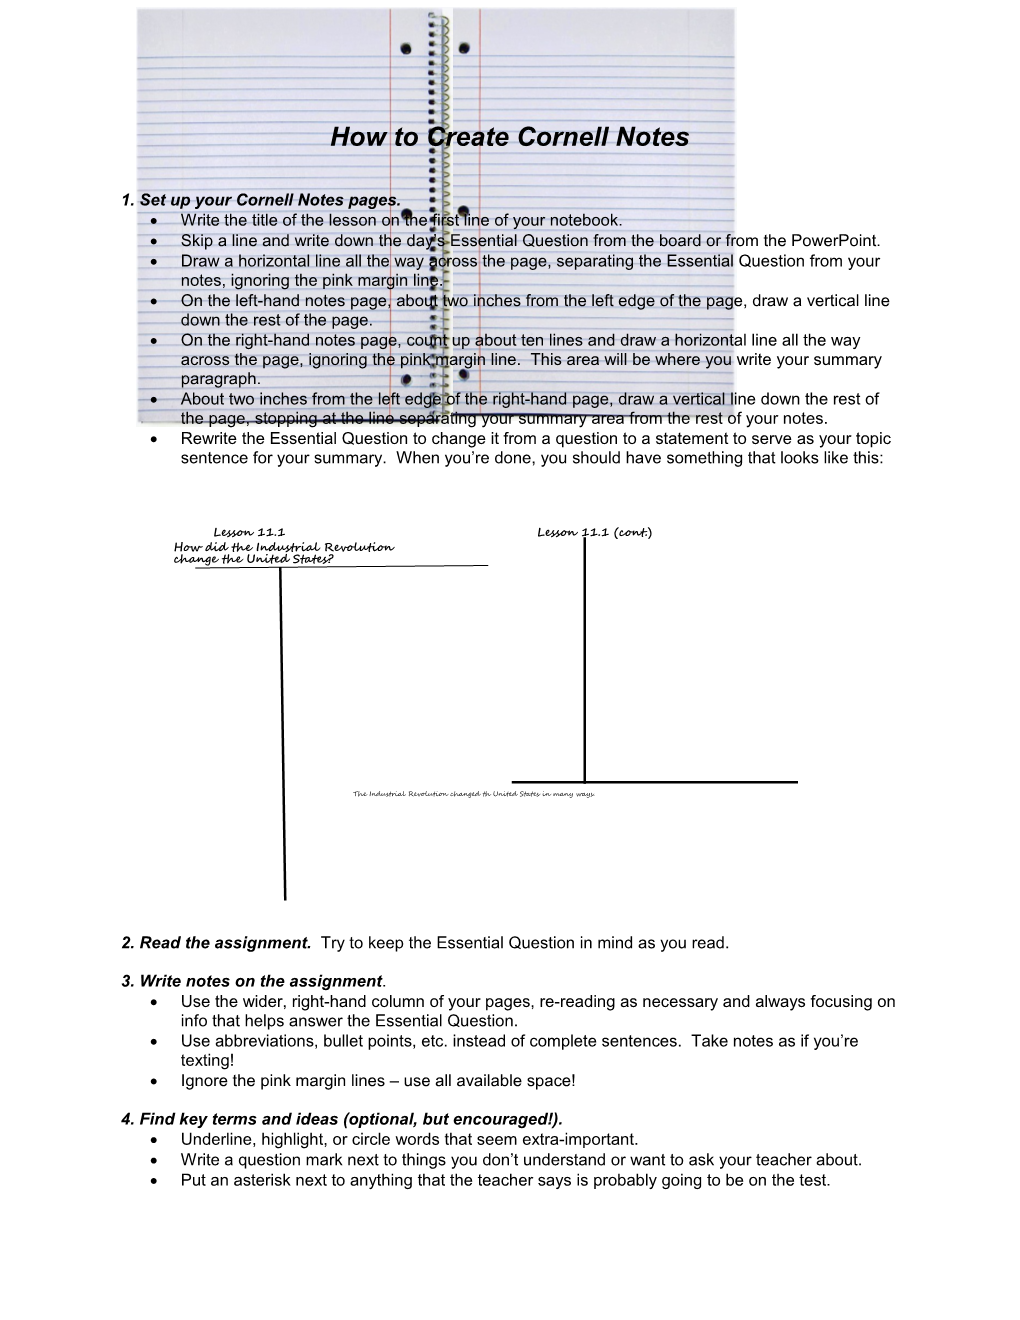 How to Create Cornell Notes